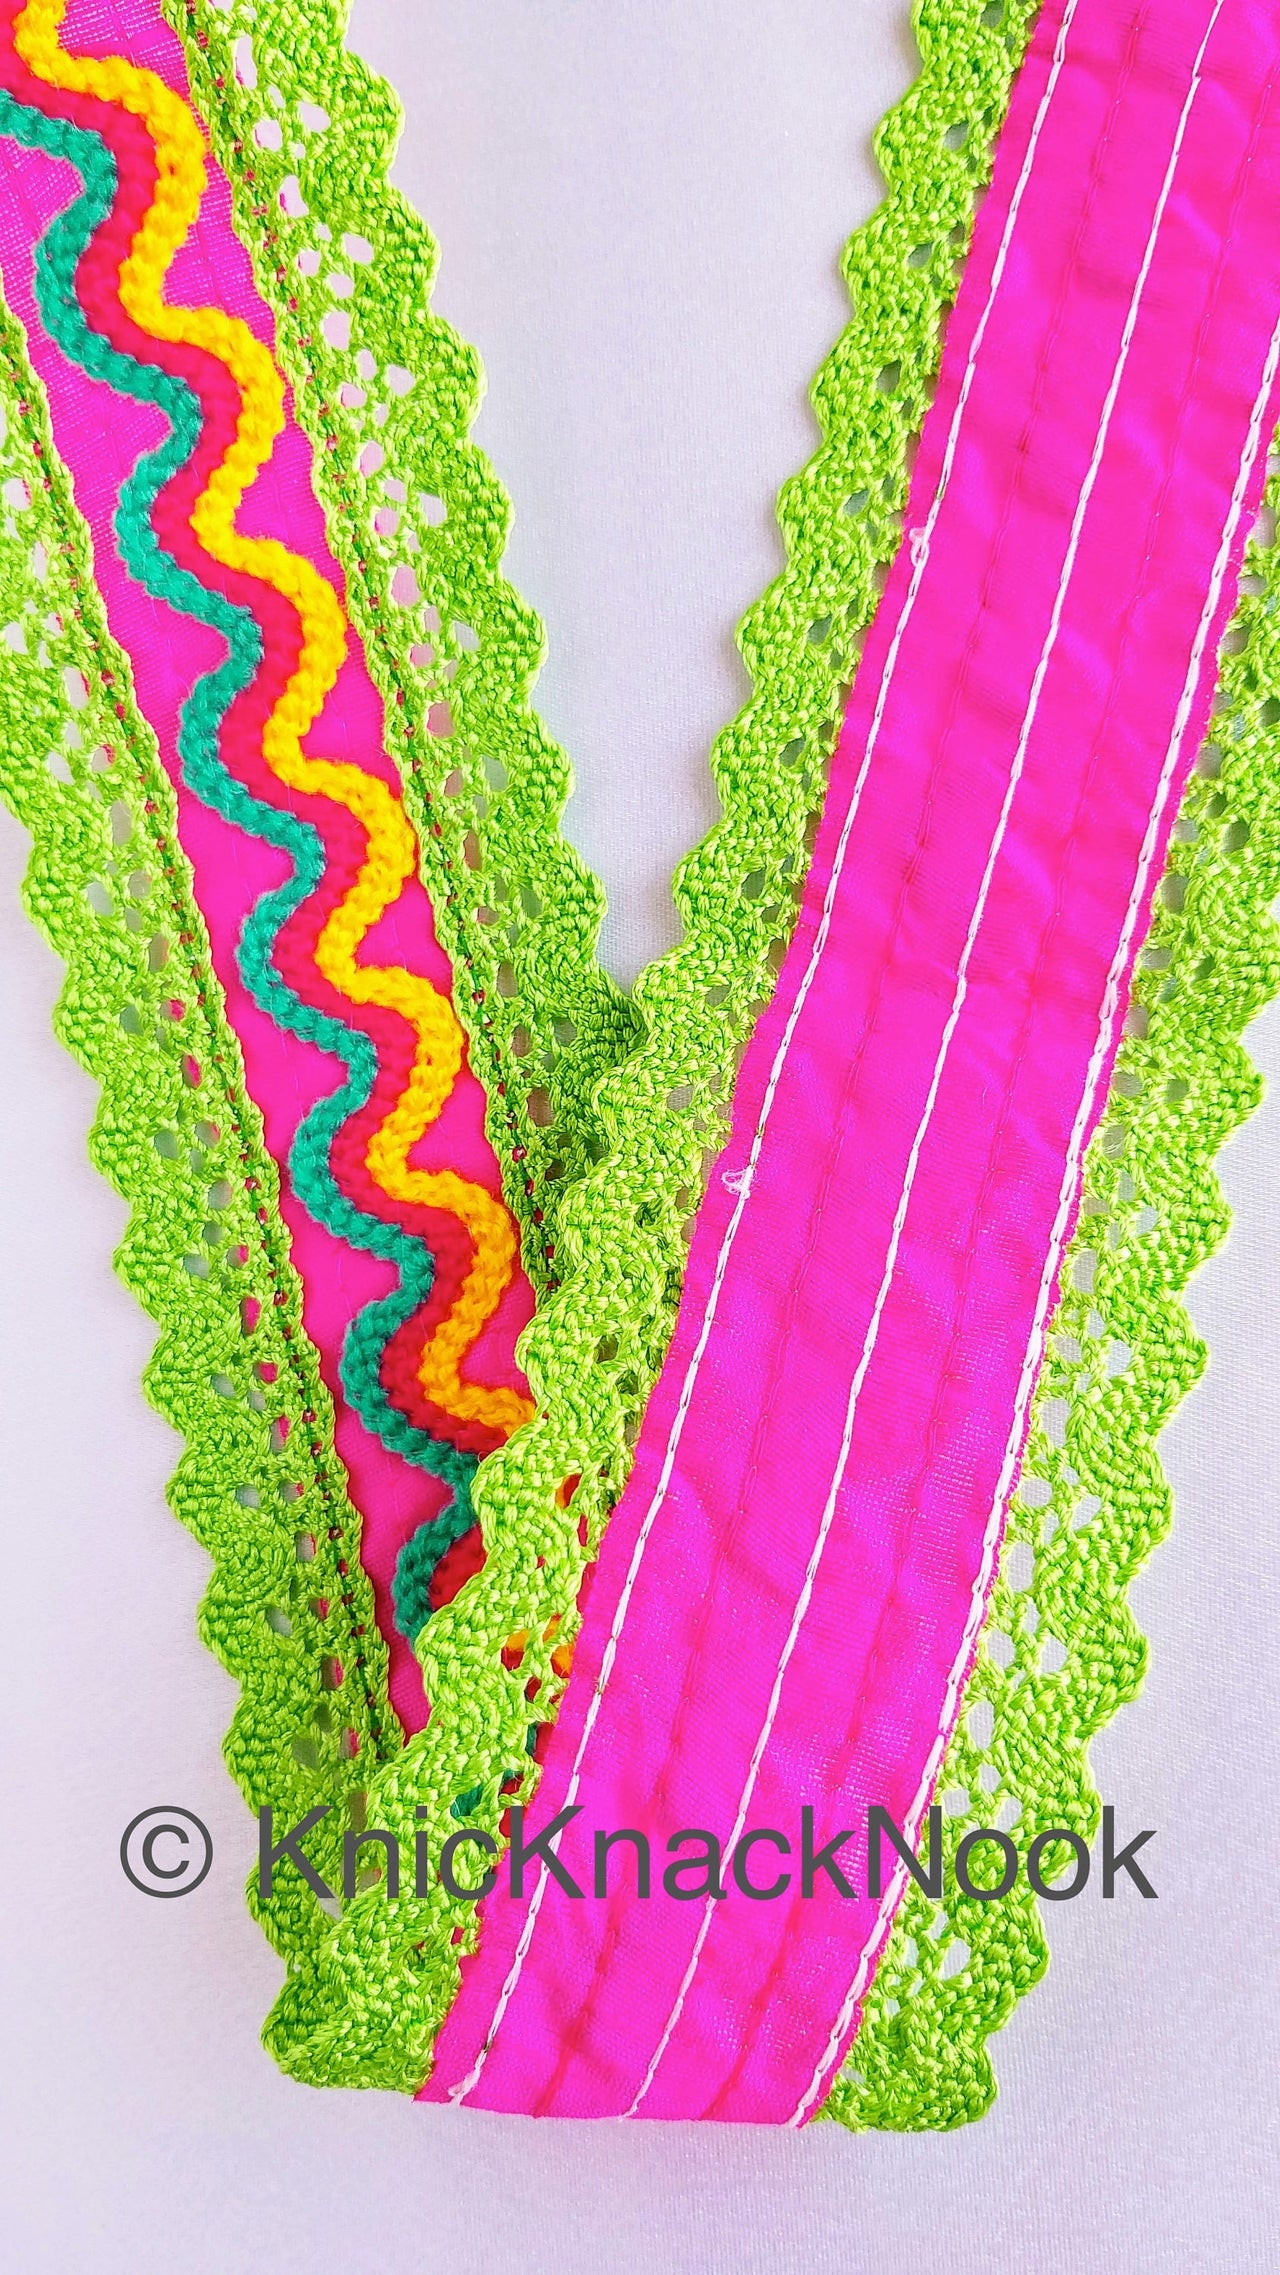 Wholesale Fabric Trim With Embroidery And Crochet, Trim By 9 Yard Lace, Approx. 55mm Wide